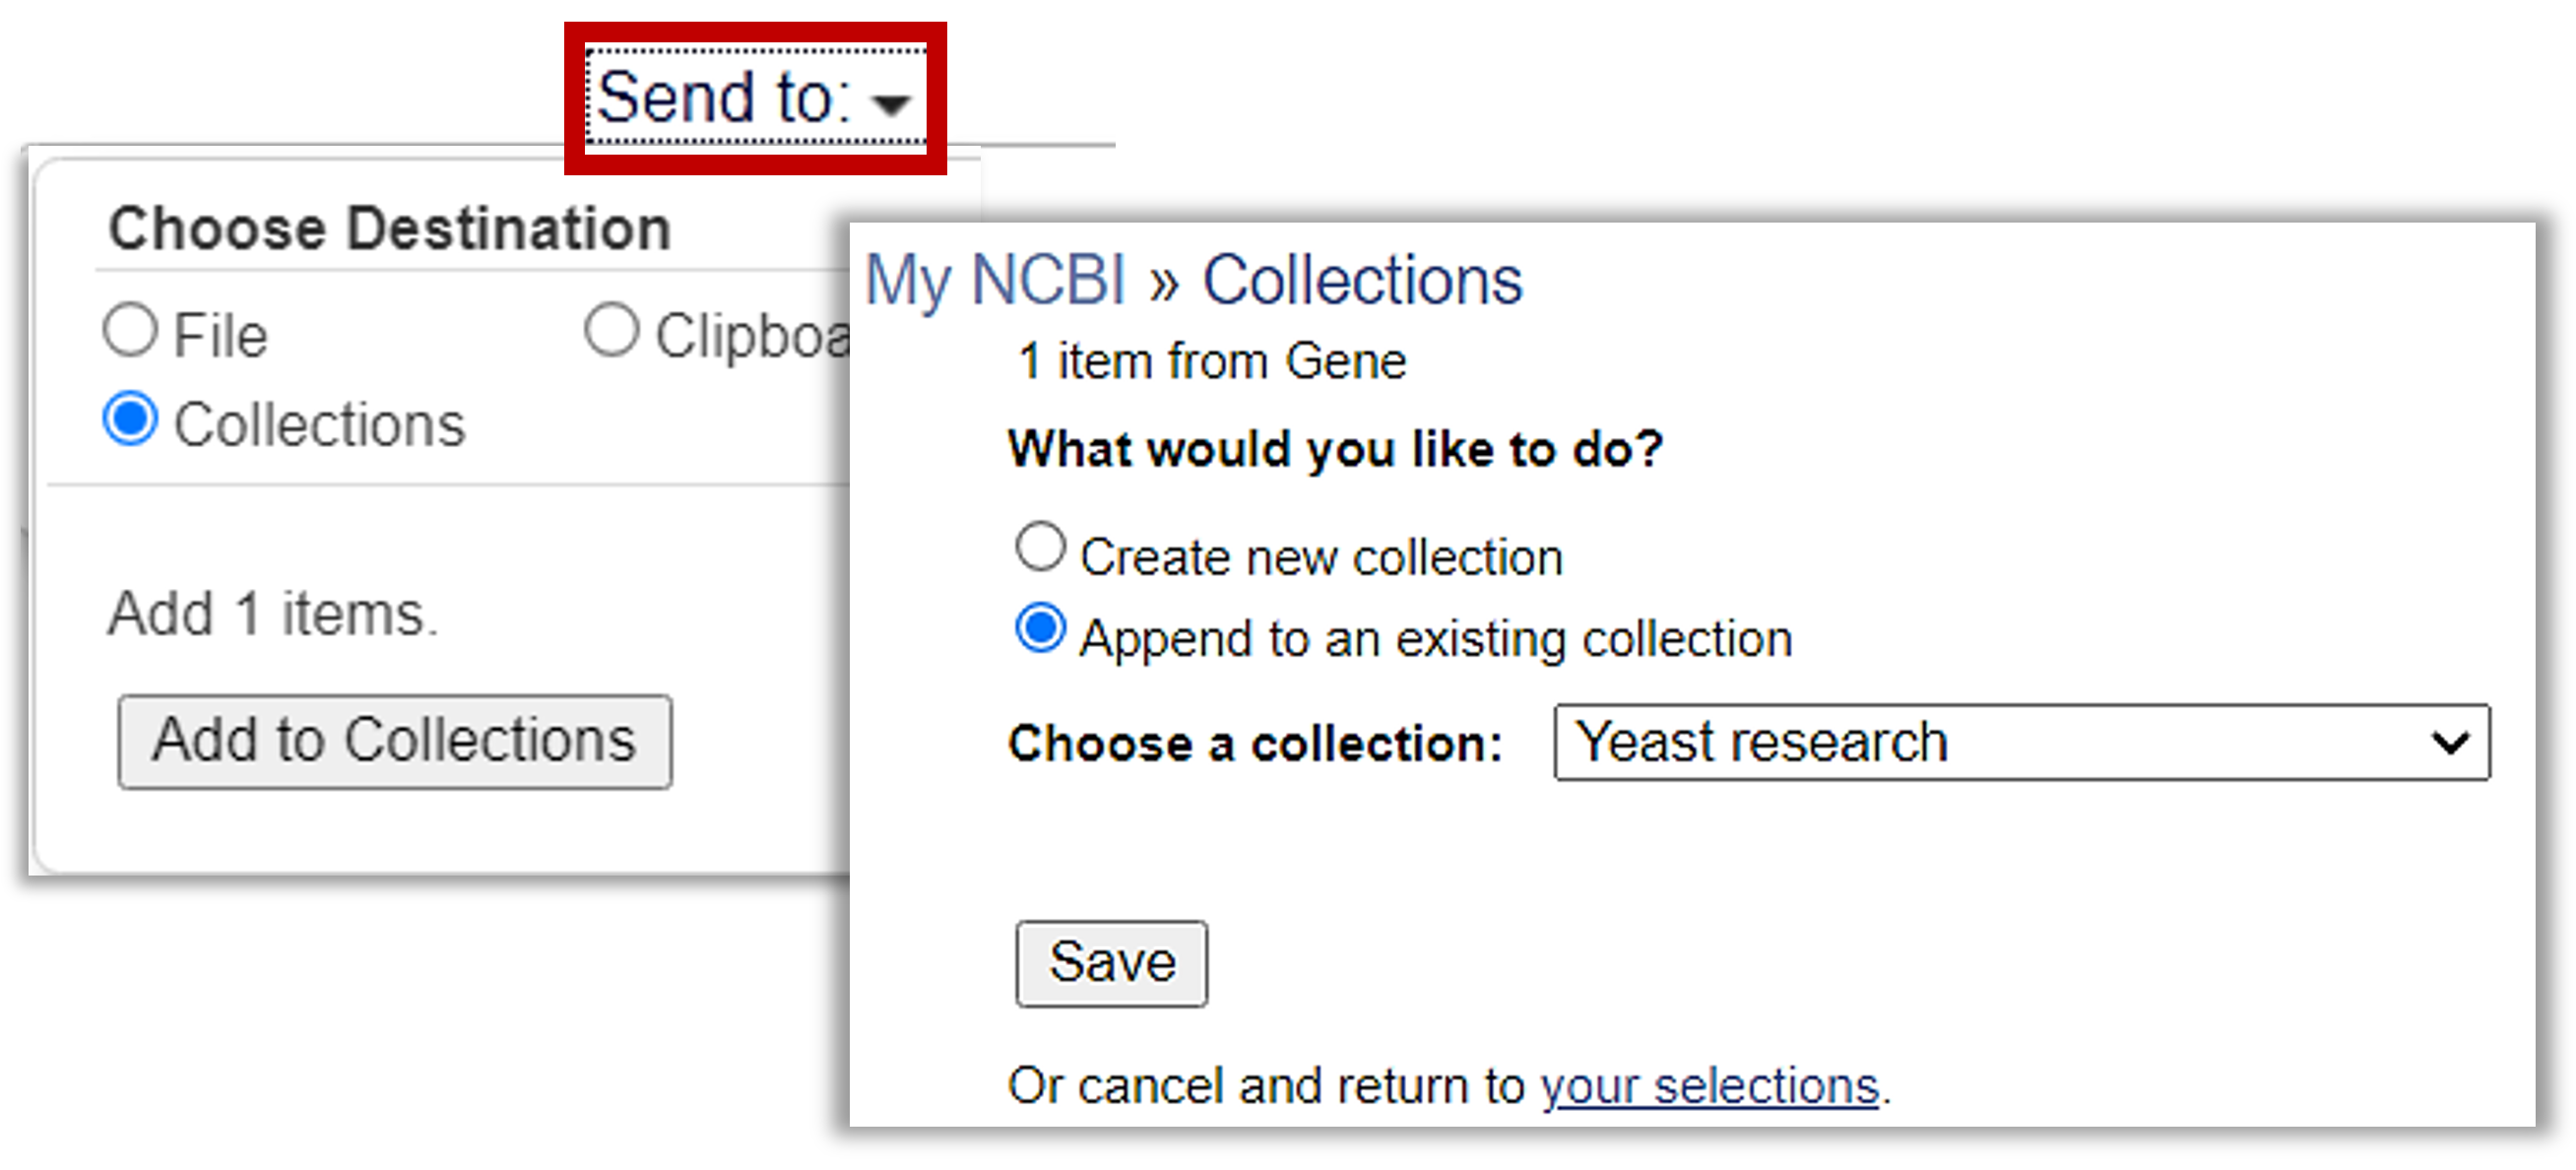 Add to existing collections steps:  Send to, collections, add to existing collection